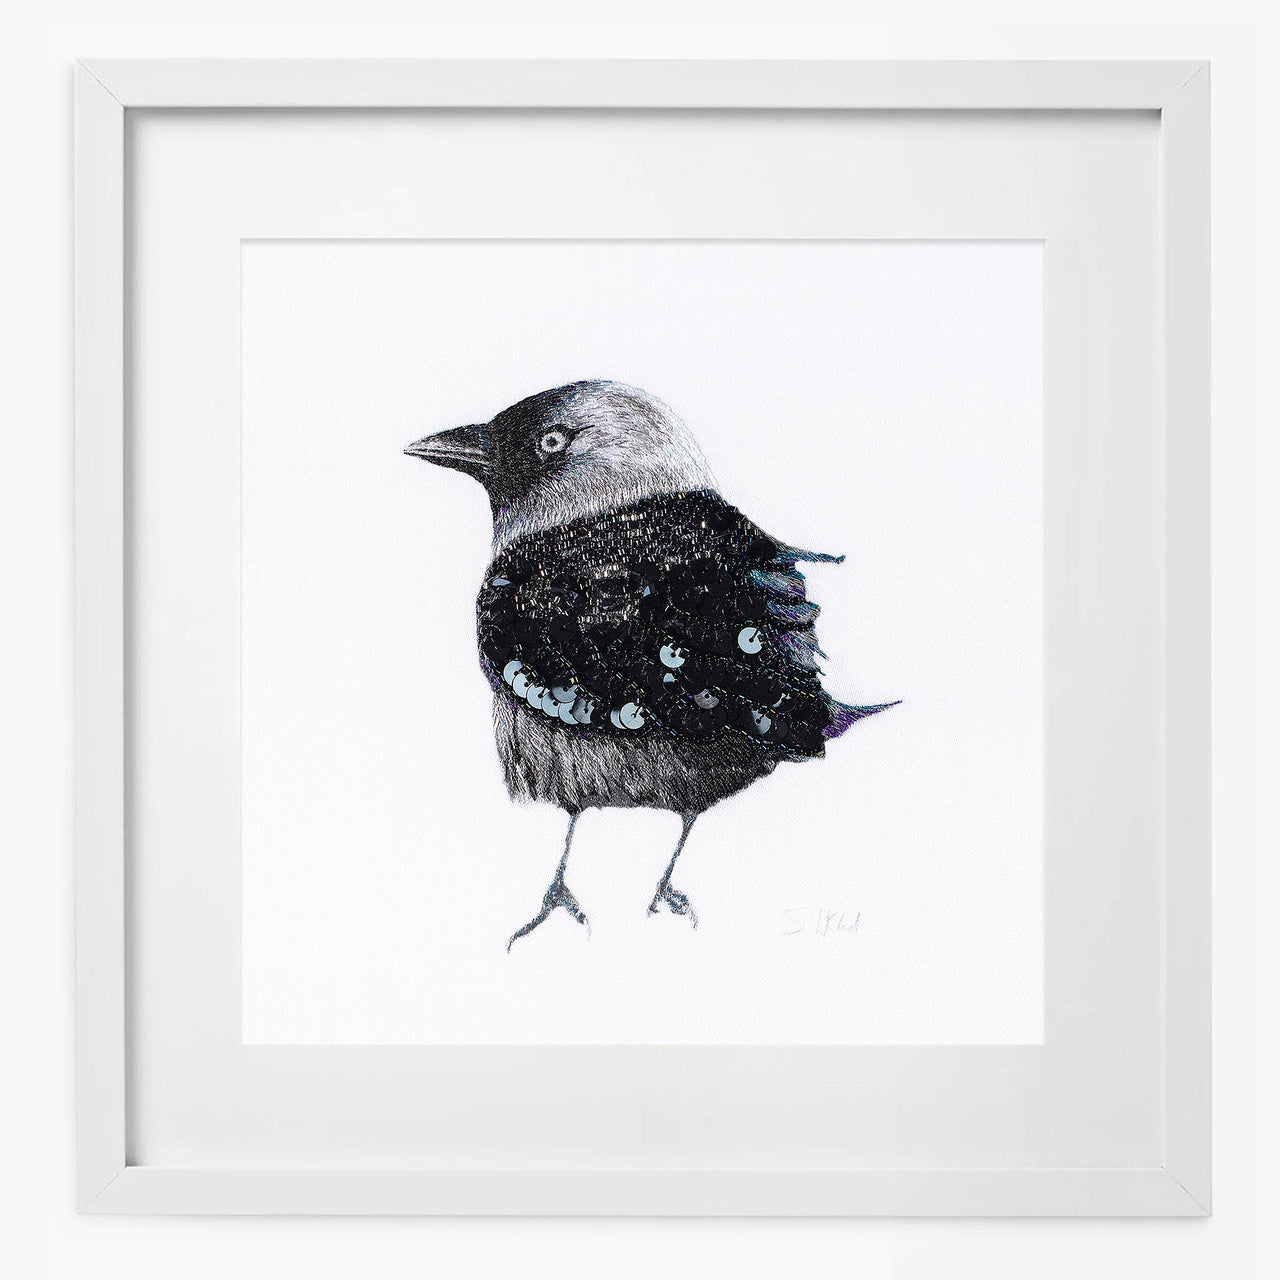 Limited edition print of hand embroidered bird with beads and sequins in white frame